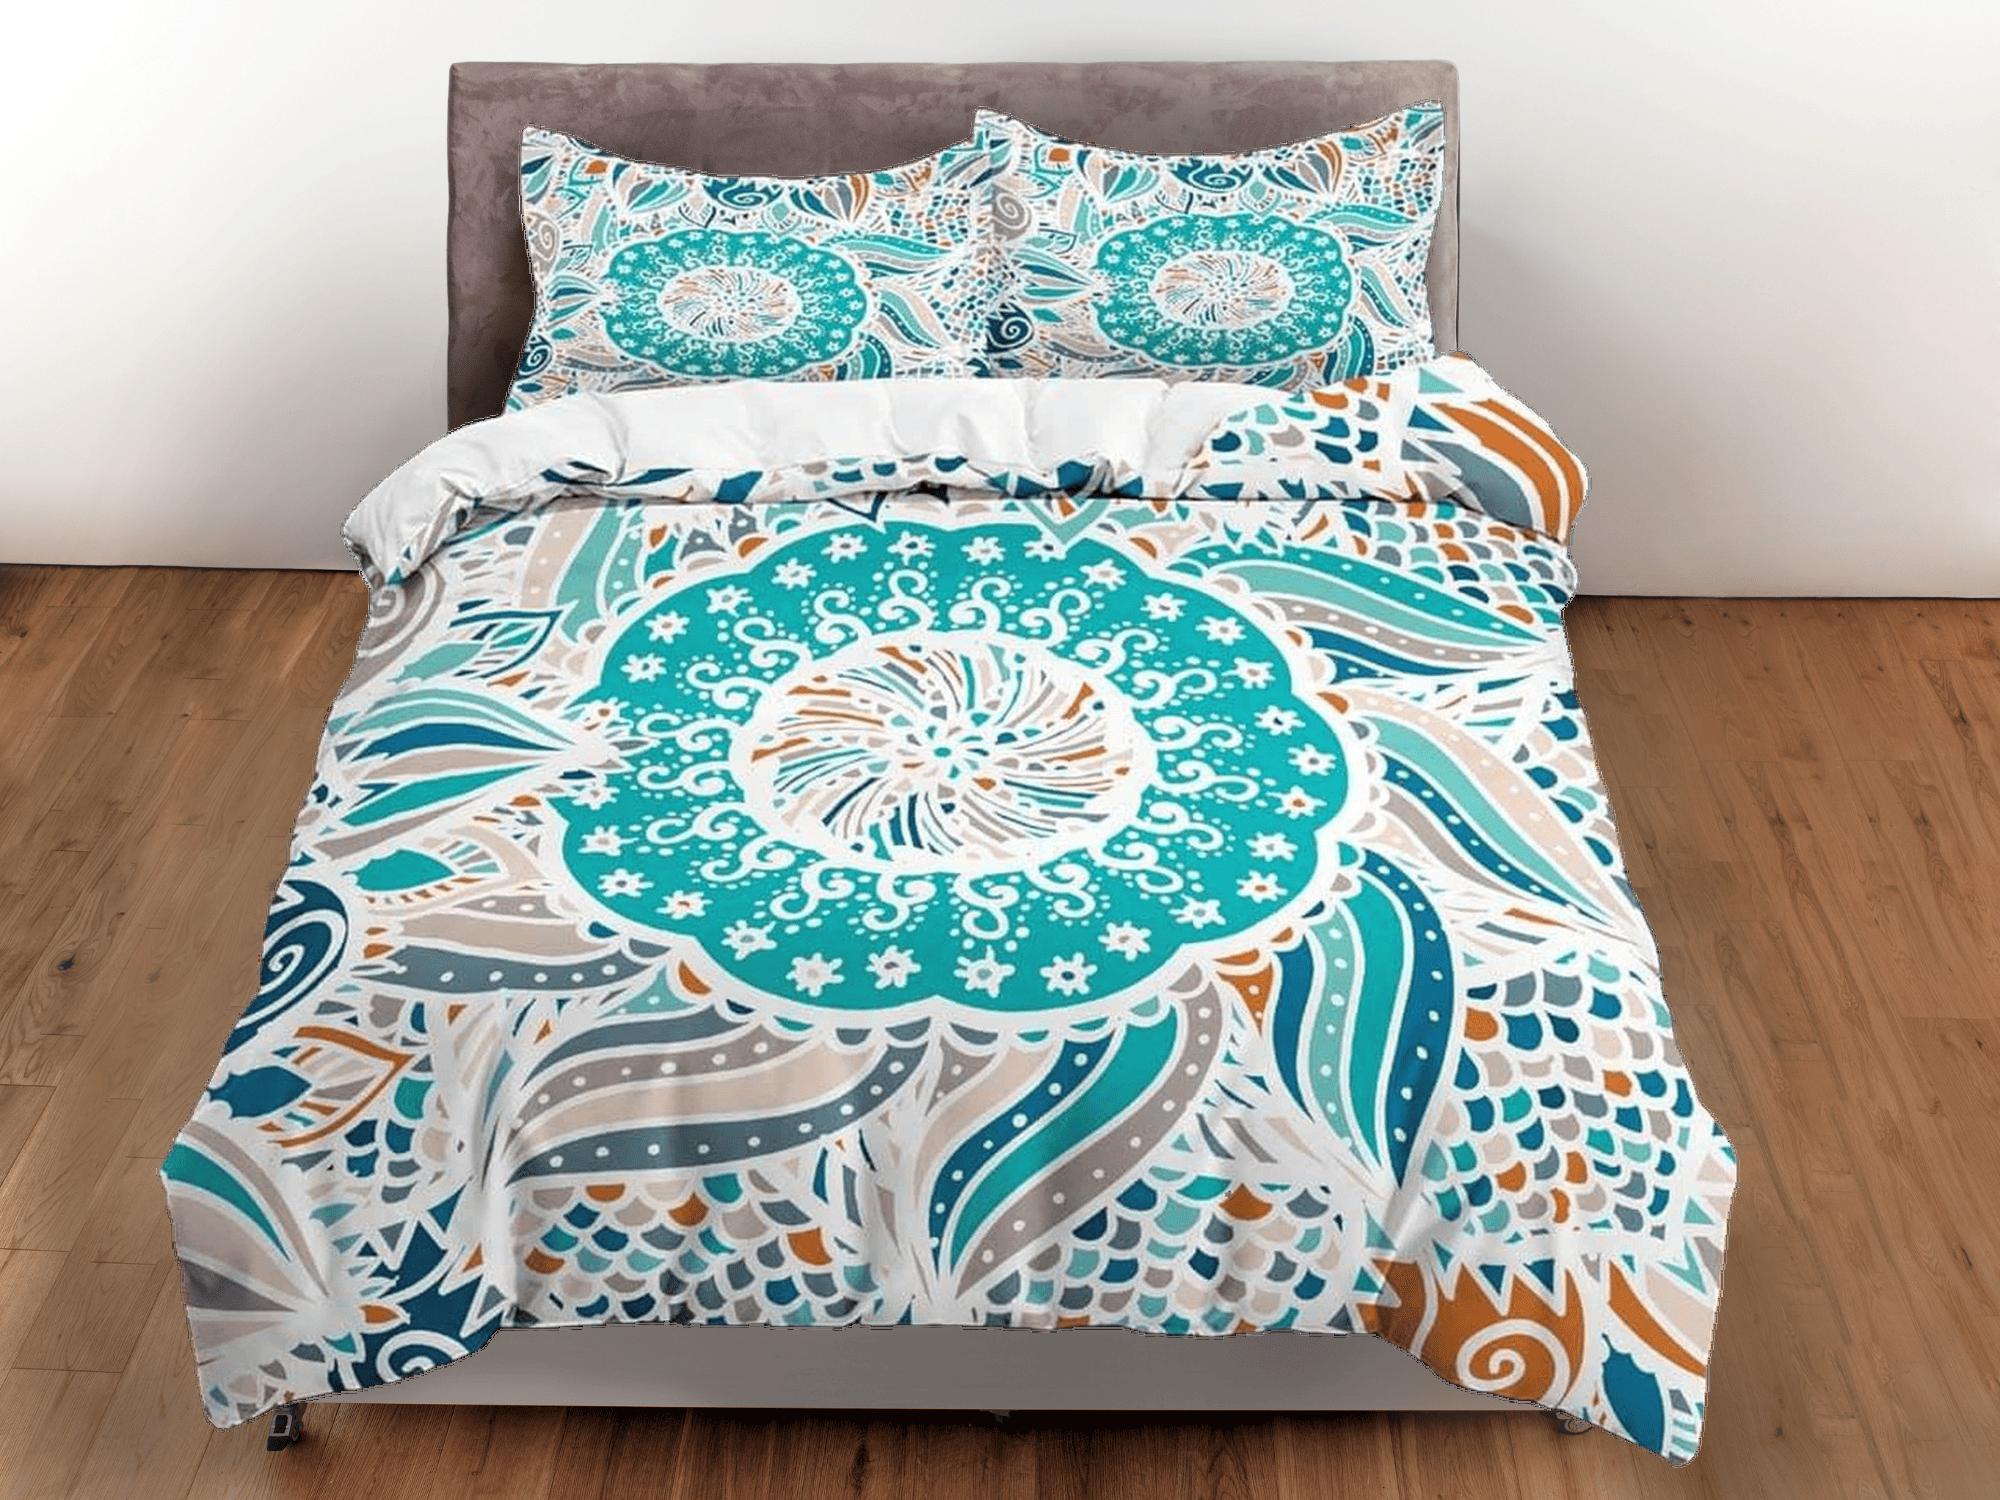 daintyduvet Aqua sea green patchwork quilt fish scales printed duvet cover set, aesthetic bedding set full, king, queen size, boho bedspread shabby chic